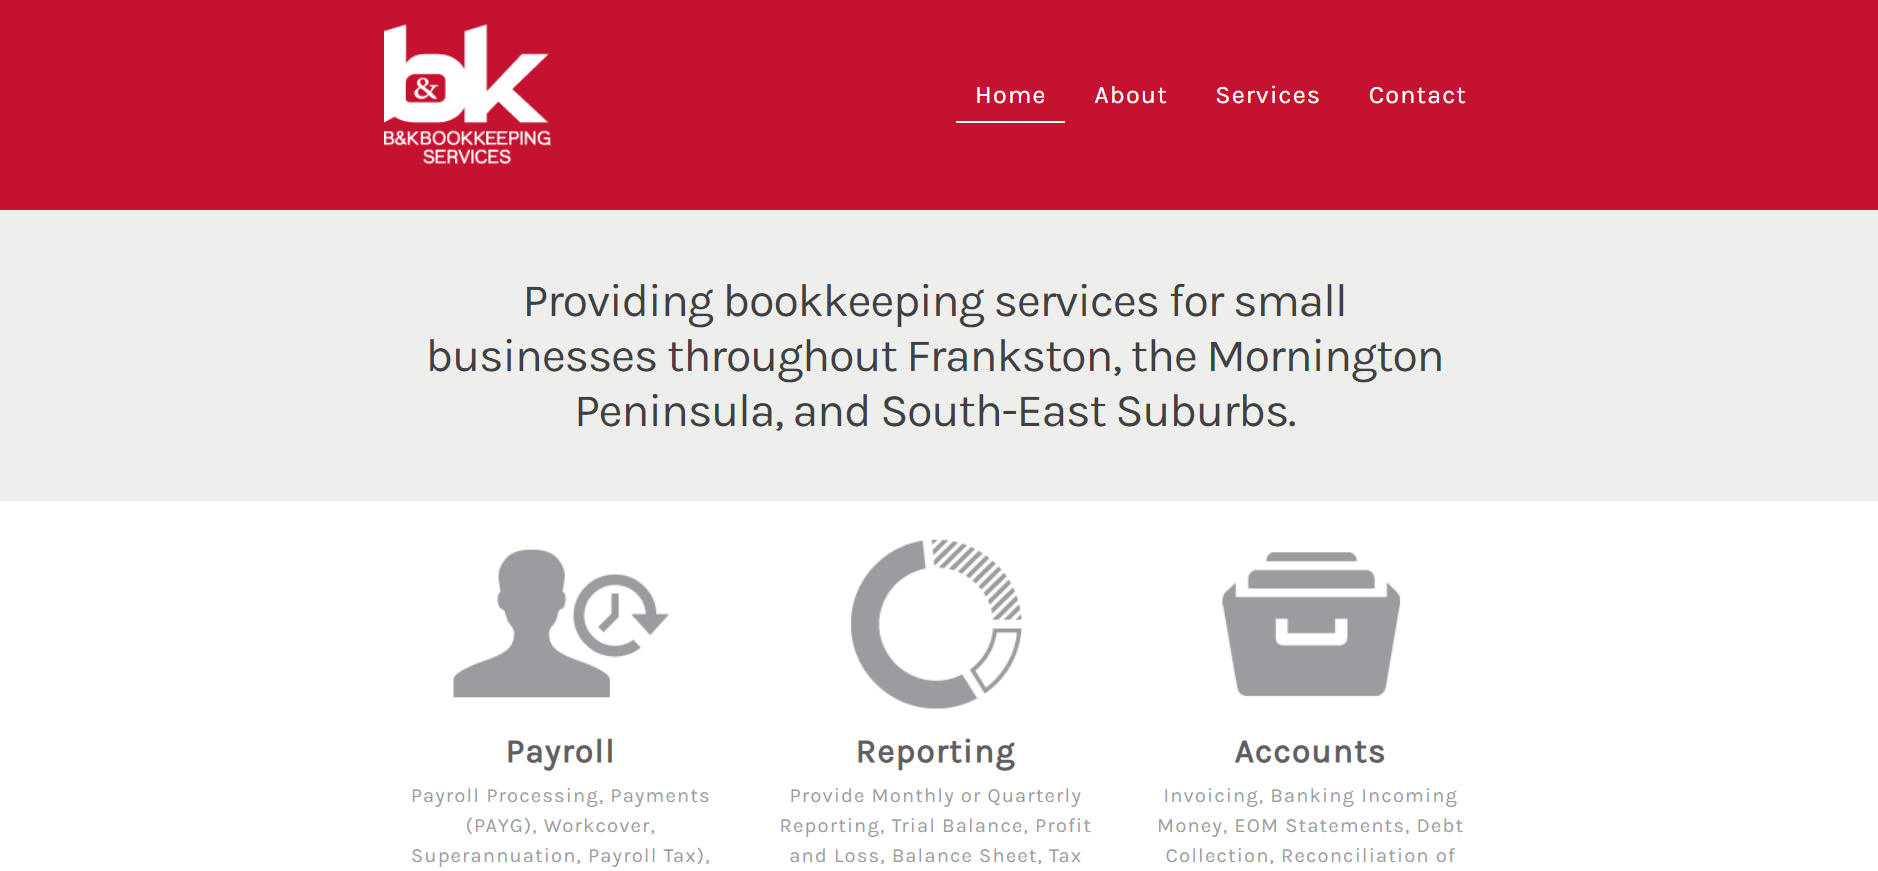 B & K Bookkeeping Services